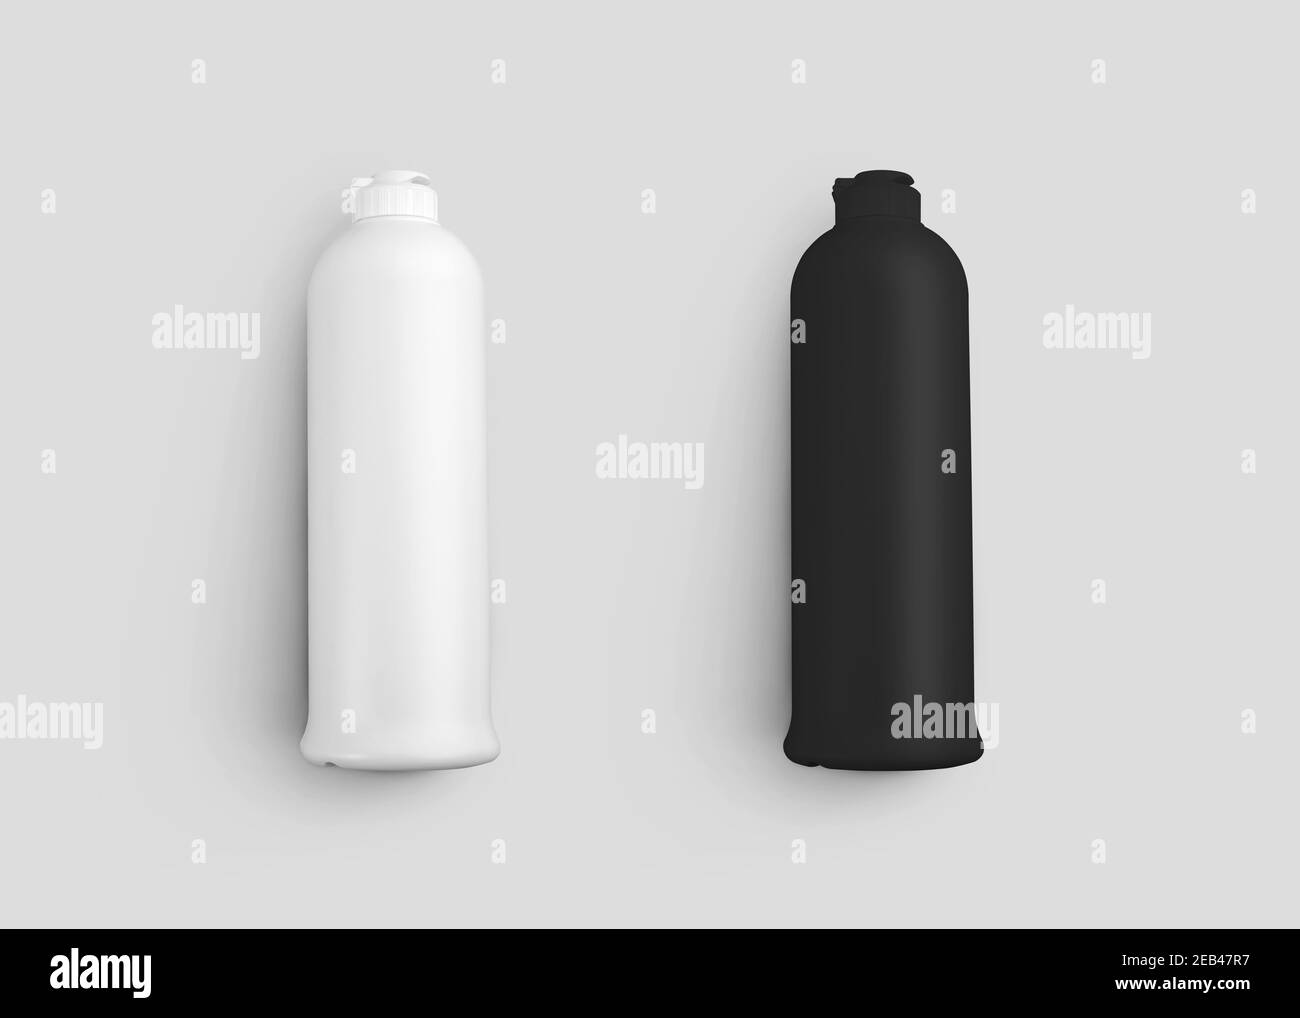 Mockup plastic bottle with flip top lid, softener jar, soap, dishwasher liquid detergent, isolated on background. Matte packaging template for present Stock Photo